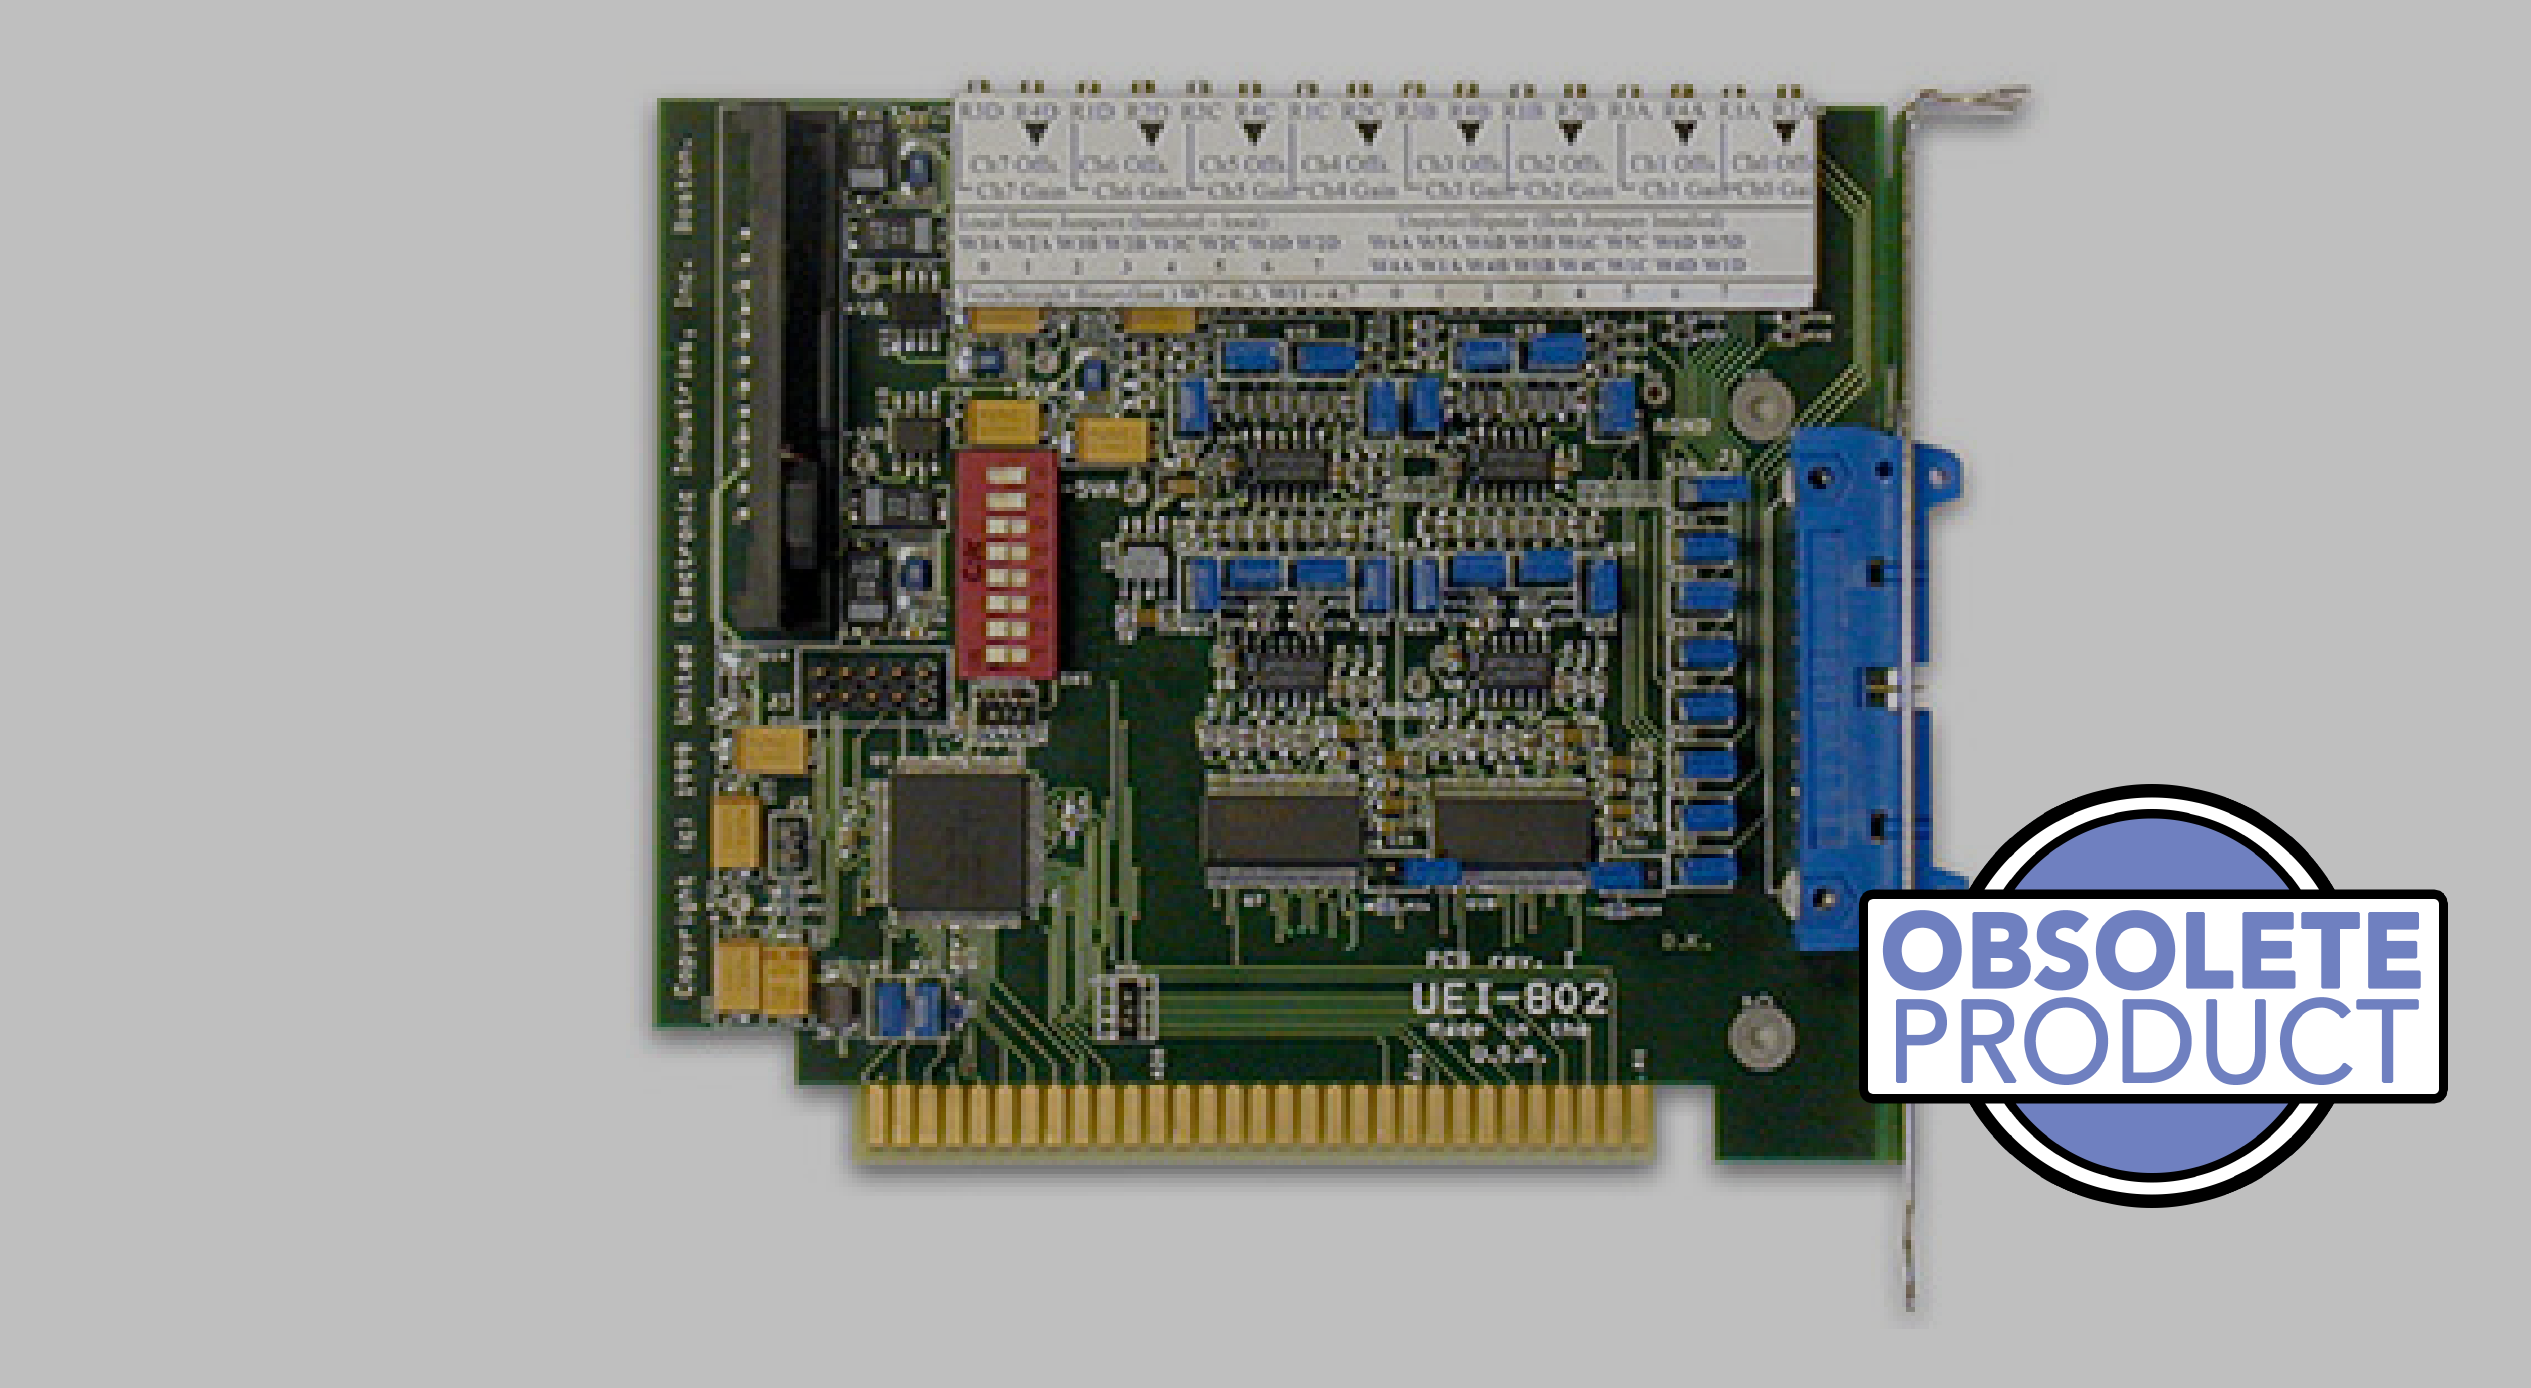 8-channel, 12-bit ISA analog output board (replaces RTI-802-8)